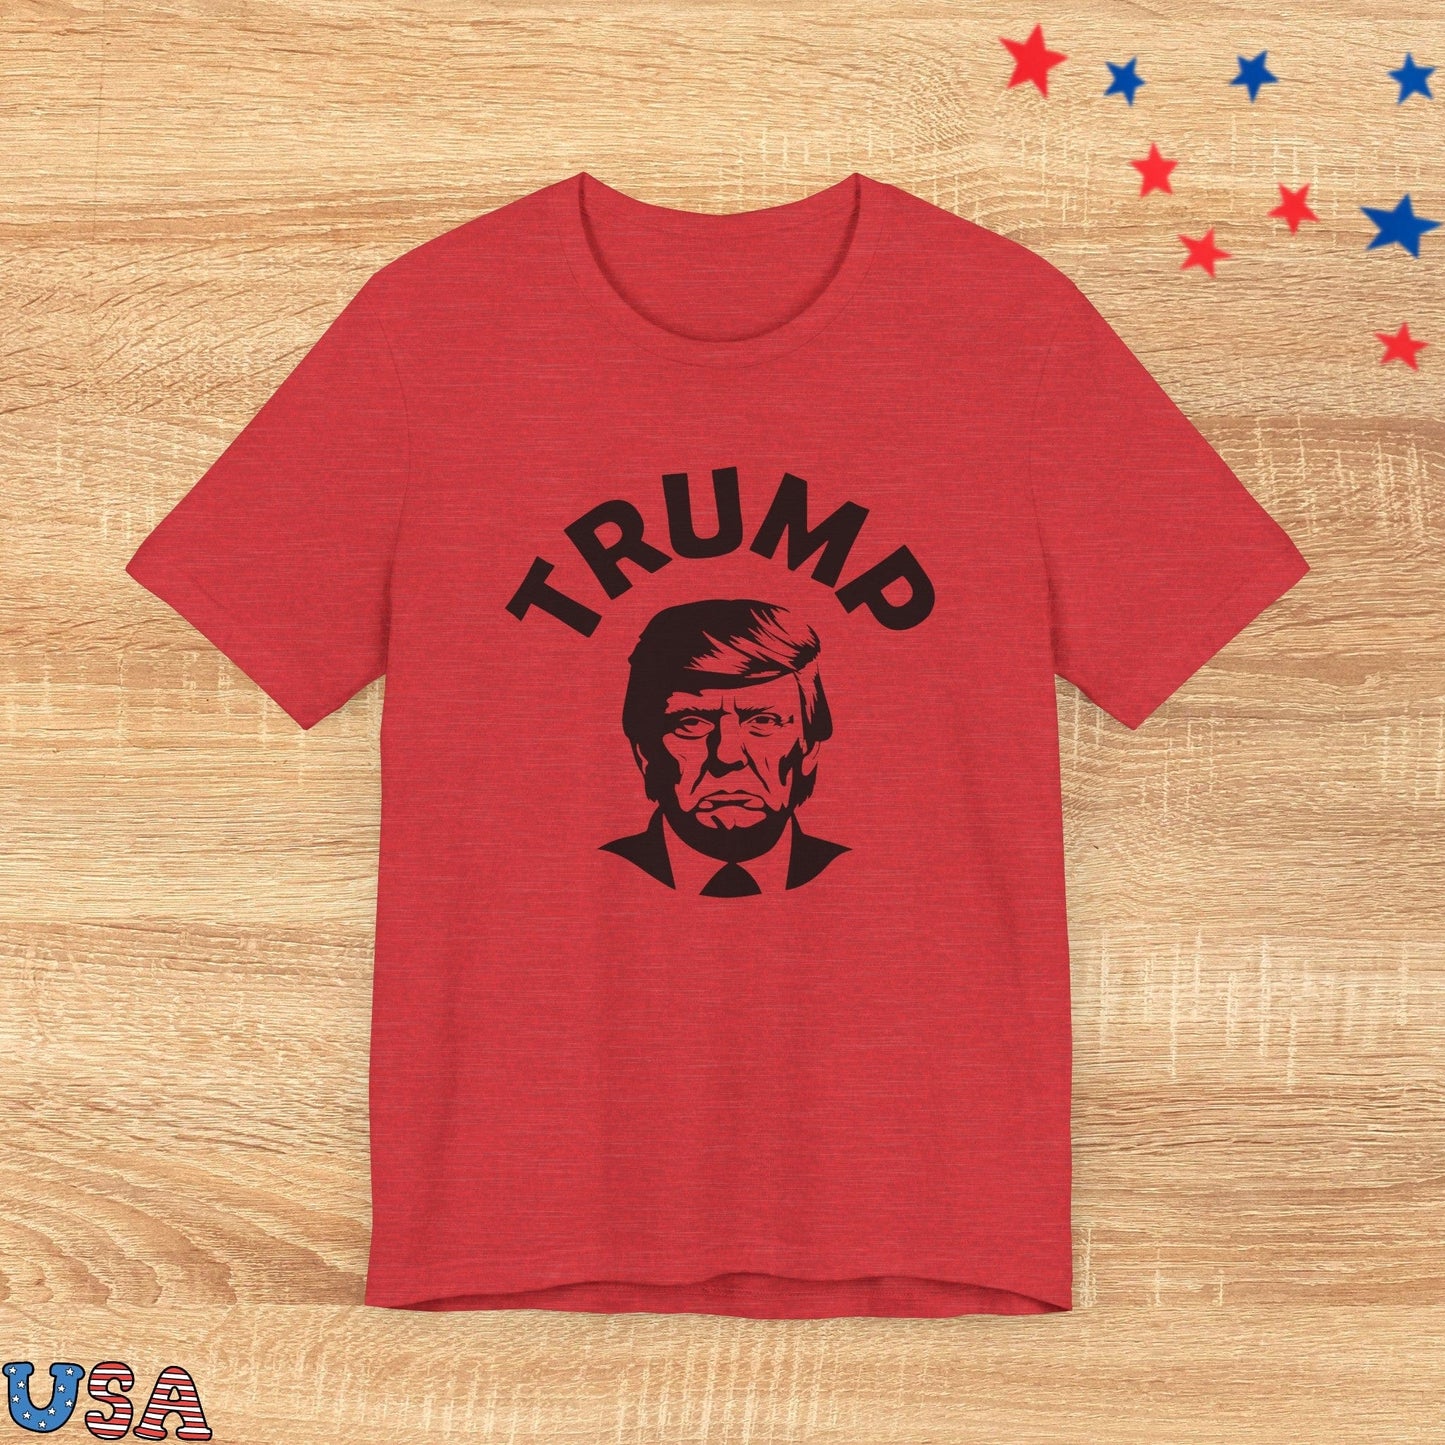 patriotic stars T-Shirt Heather Red / XS Trump Angry Face